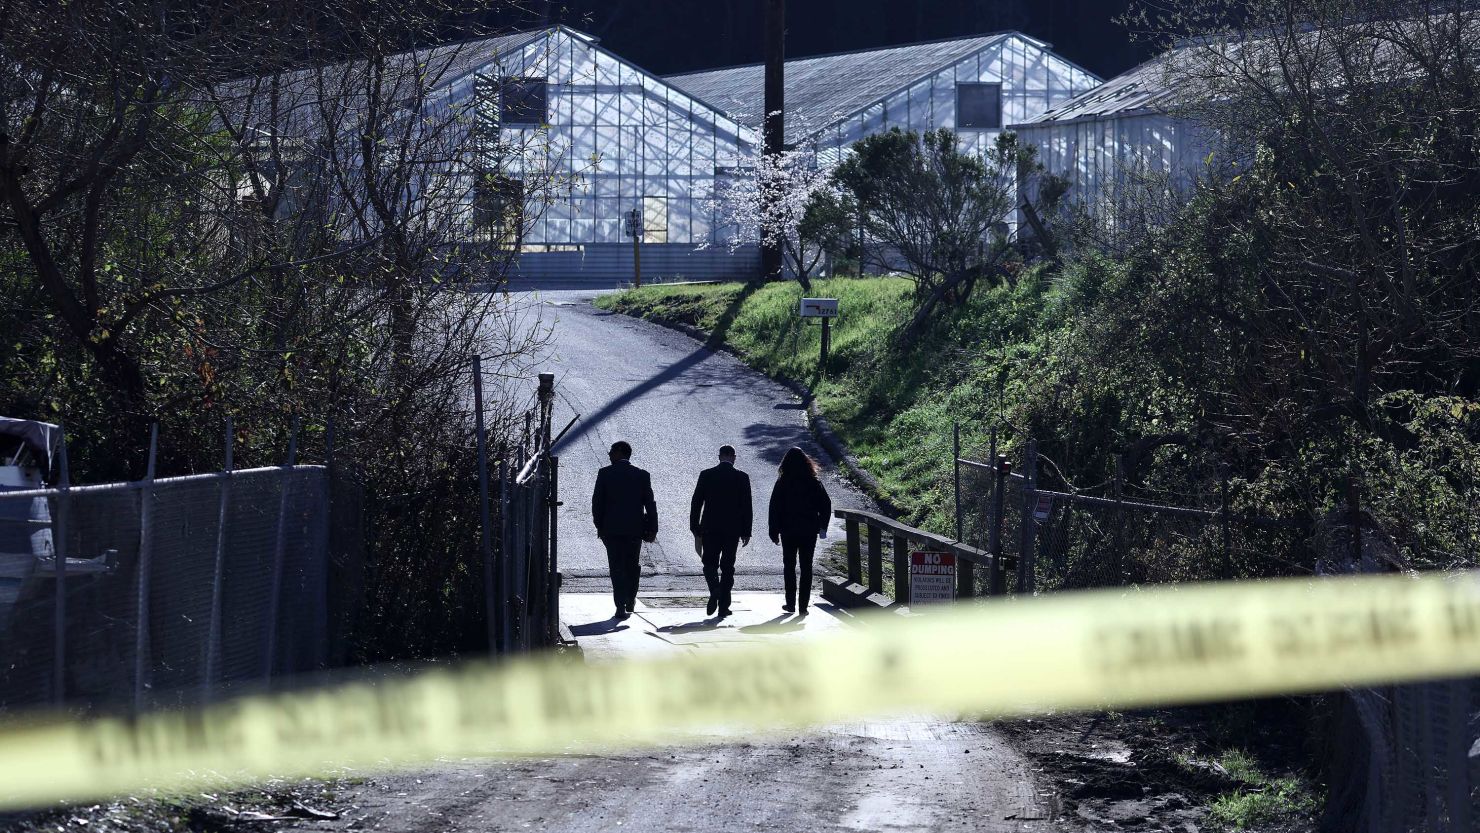 FBI agents arrived at a farm where a mass shooting occurred on January 24 in Half Moon Bay, California.